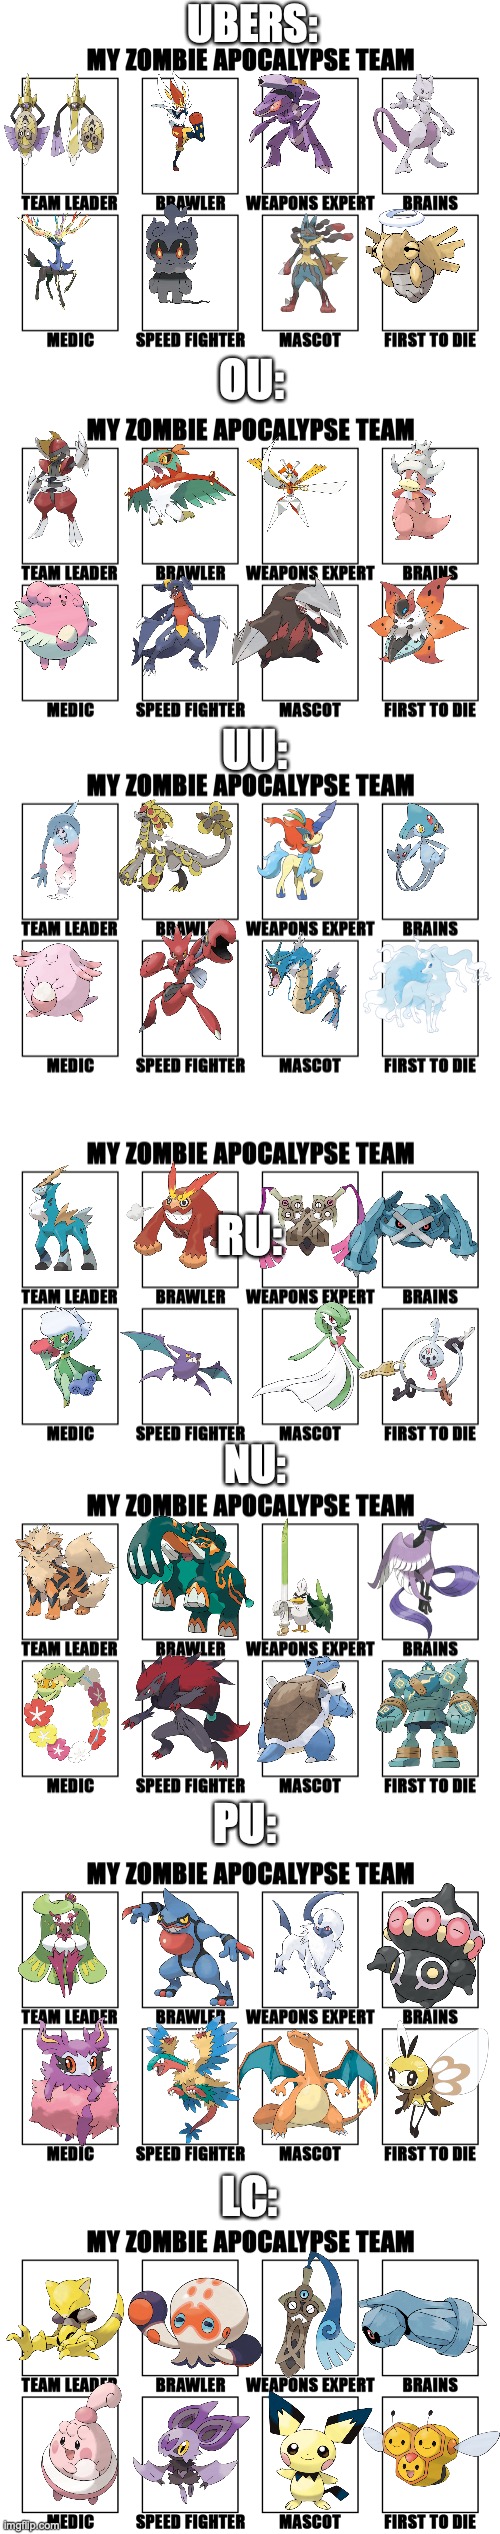 I want to use this Team for OU (Smogon tier) battles against